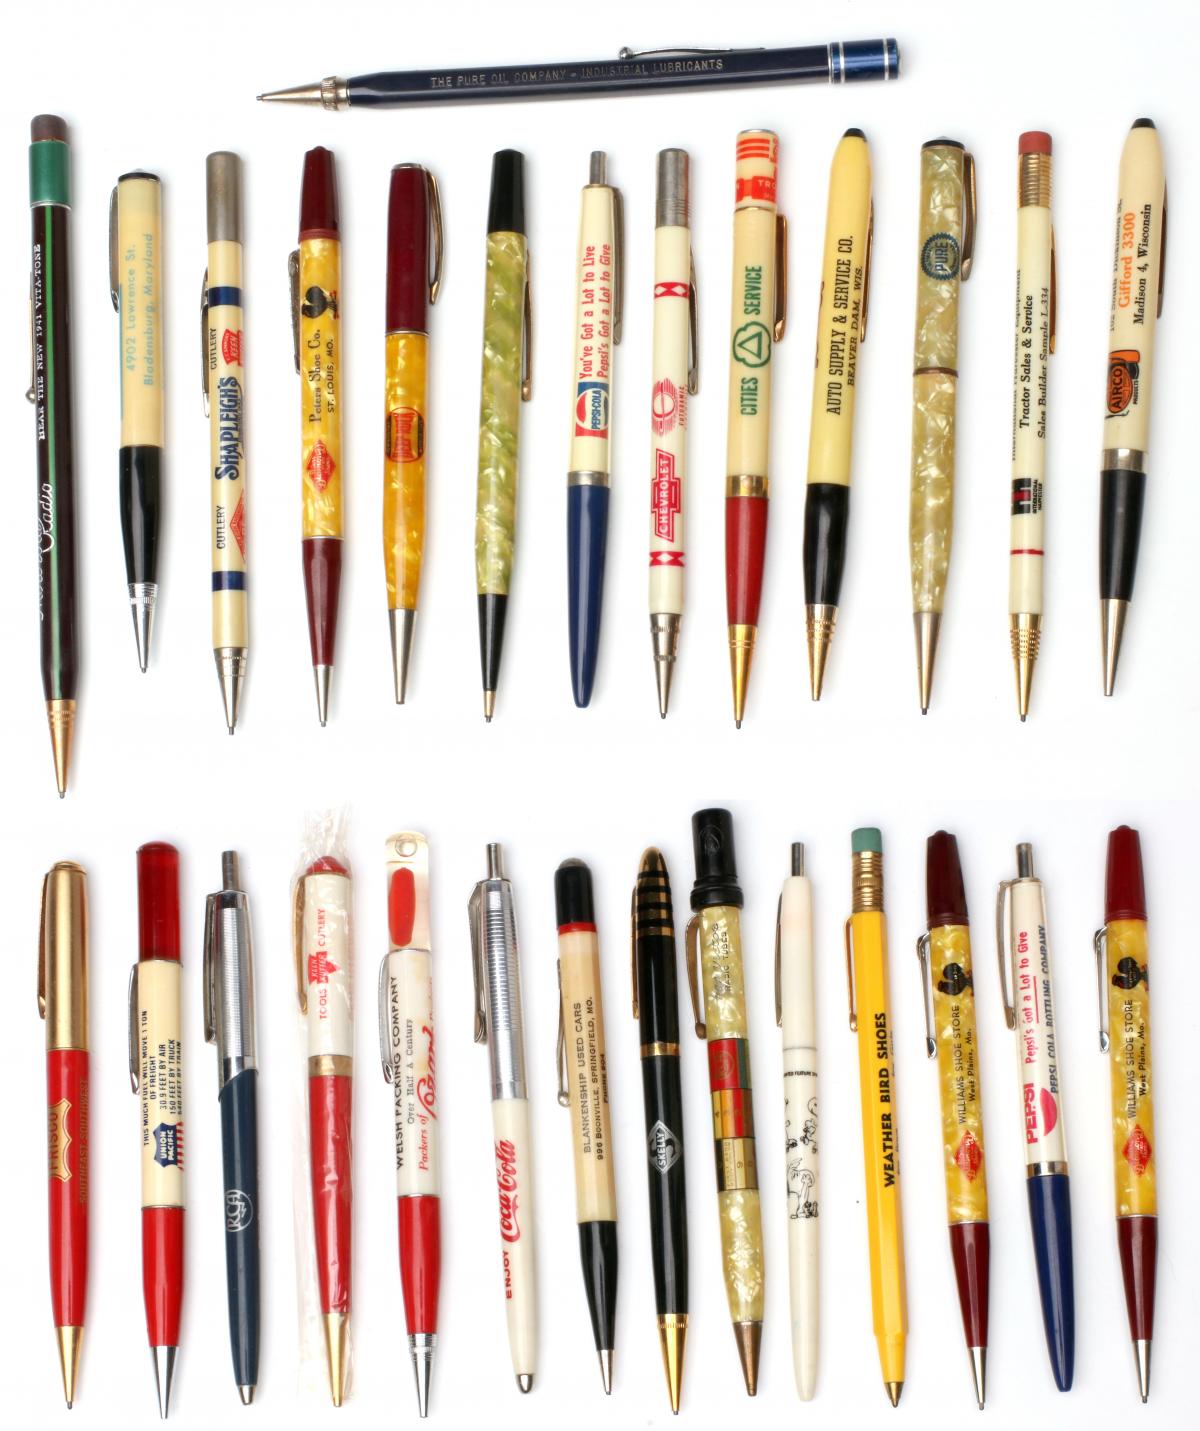 A COLLECTION OF VINTAGE ADVERTISING PENS AND PENCILS